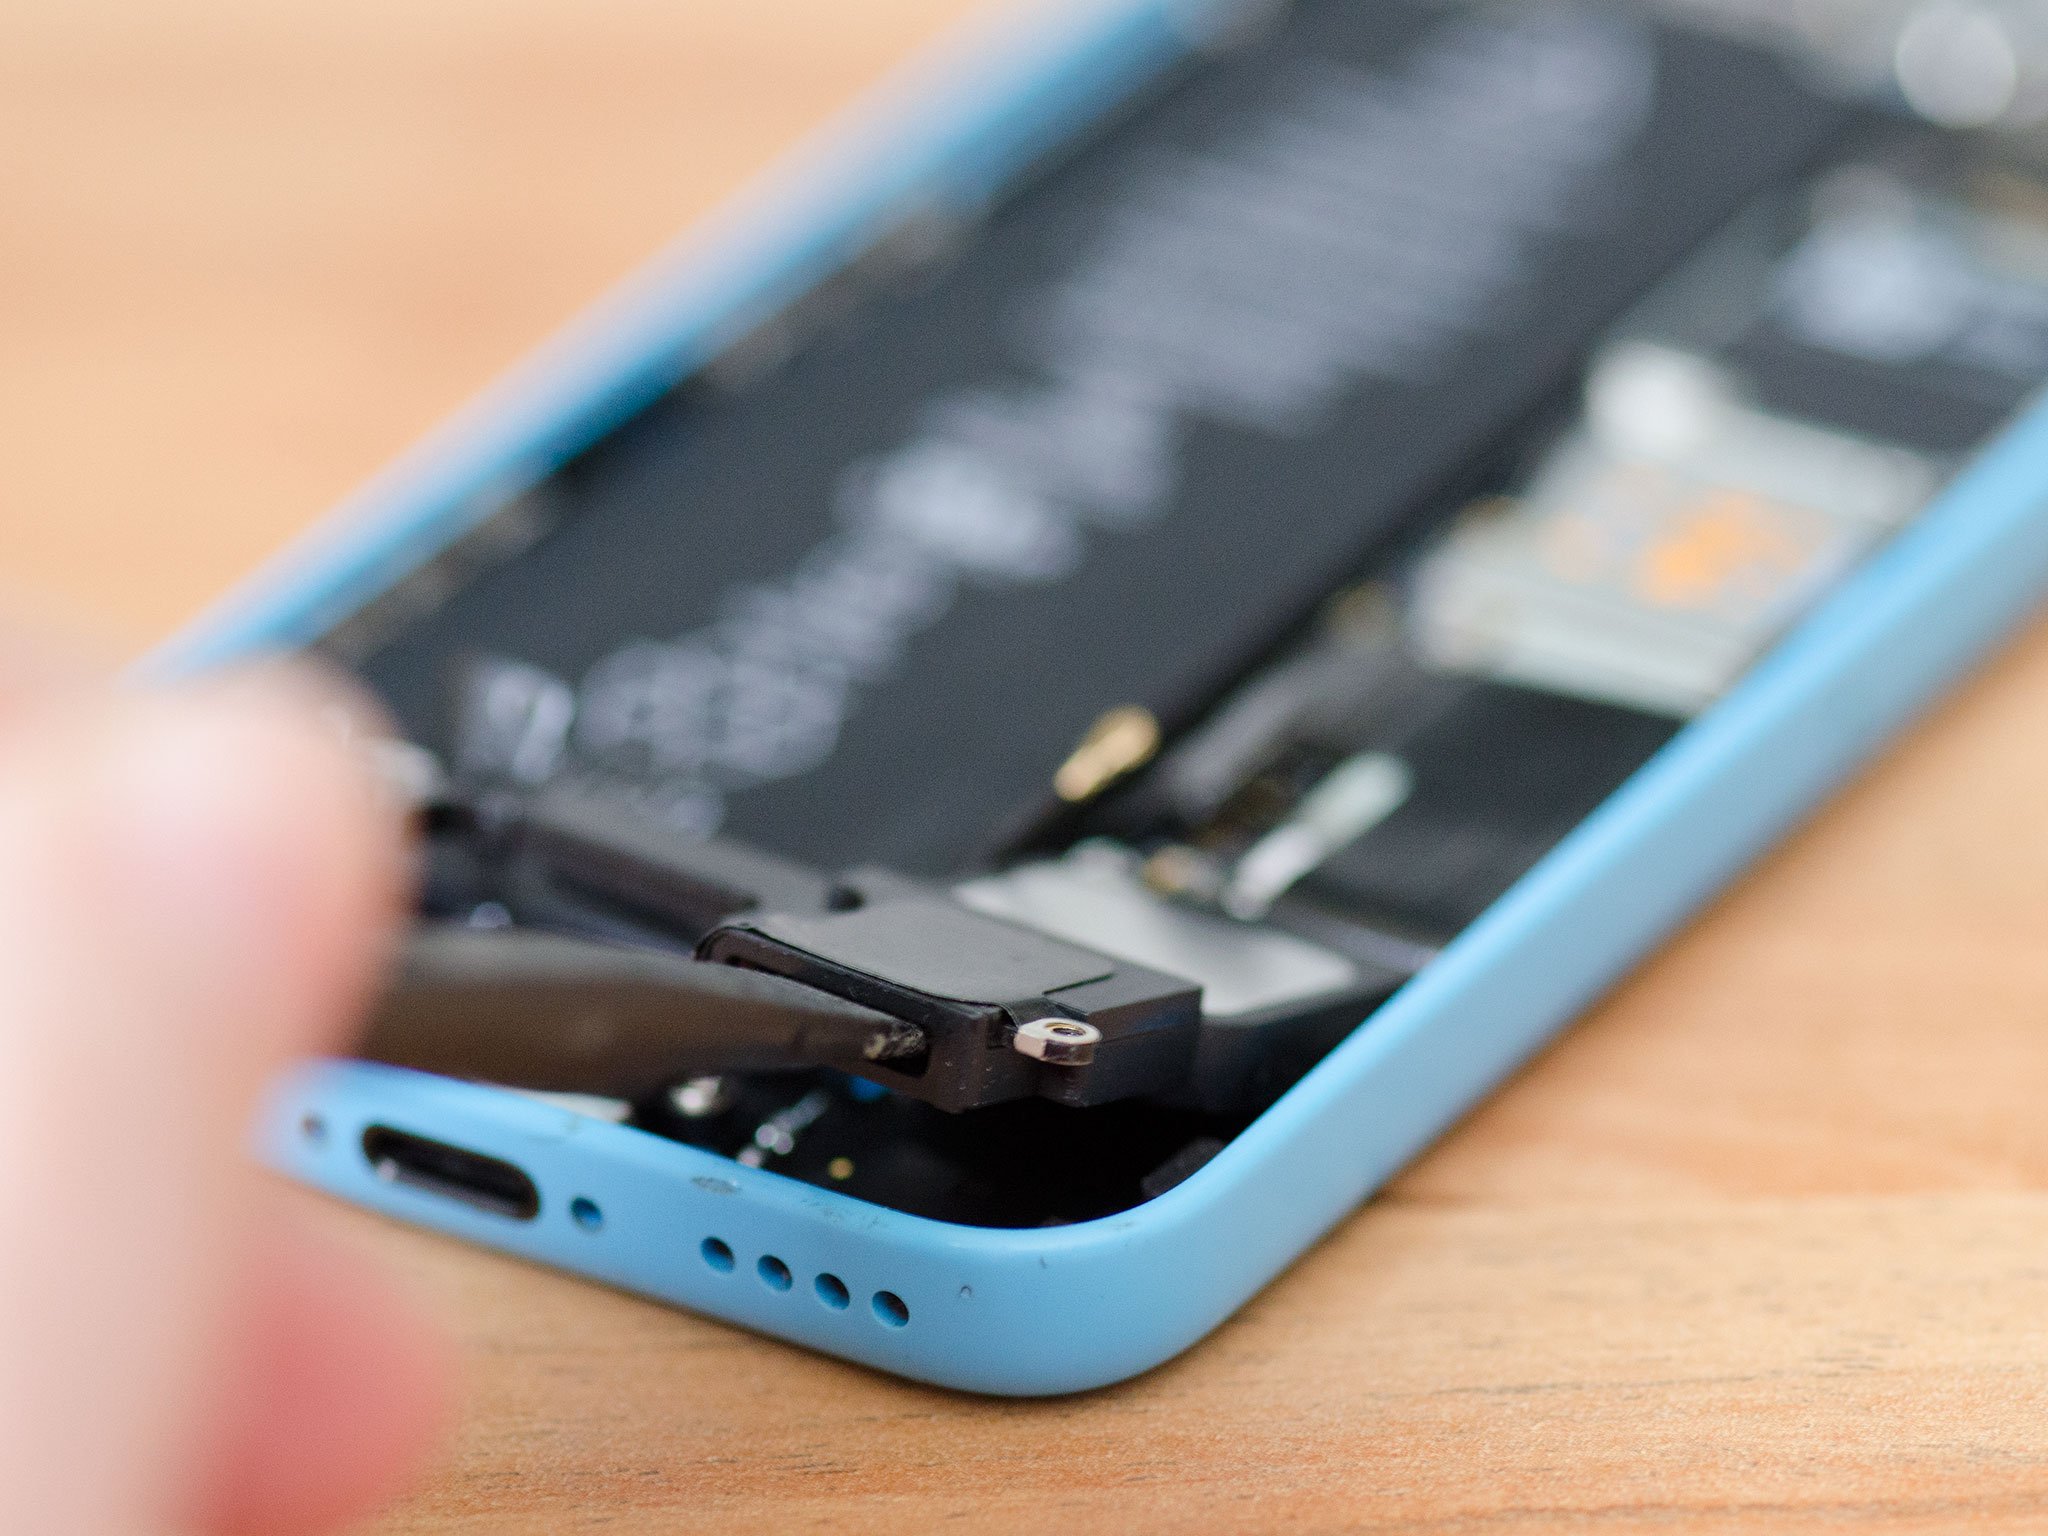 How to replace the loud speaker in an iPhone 5c